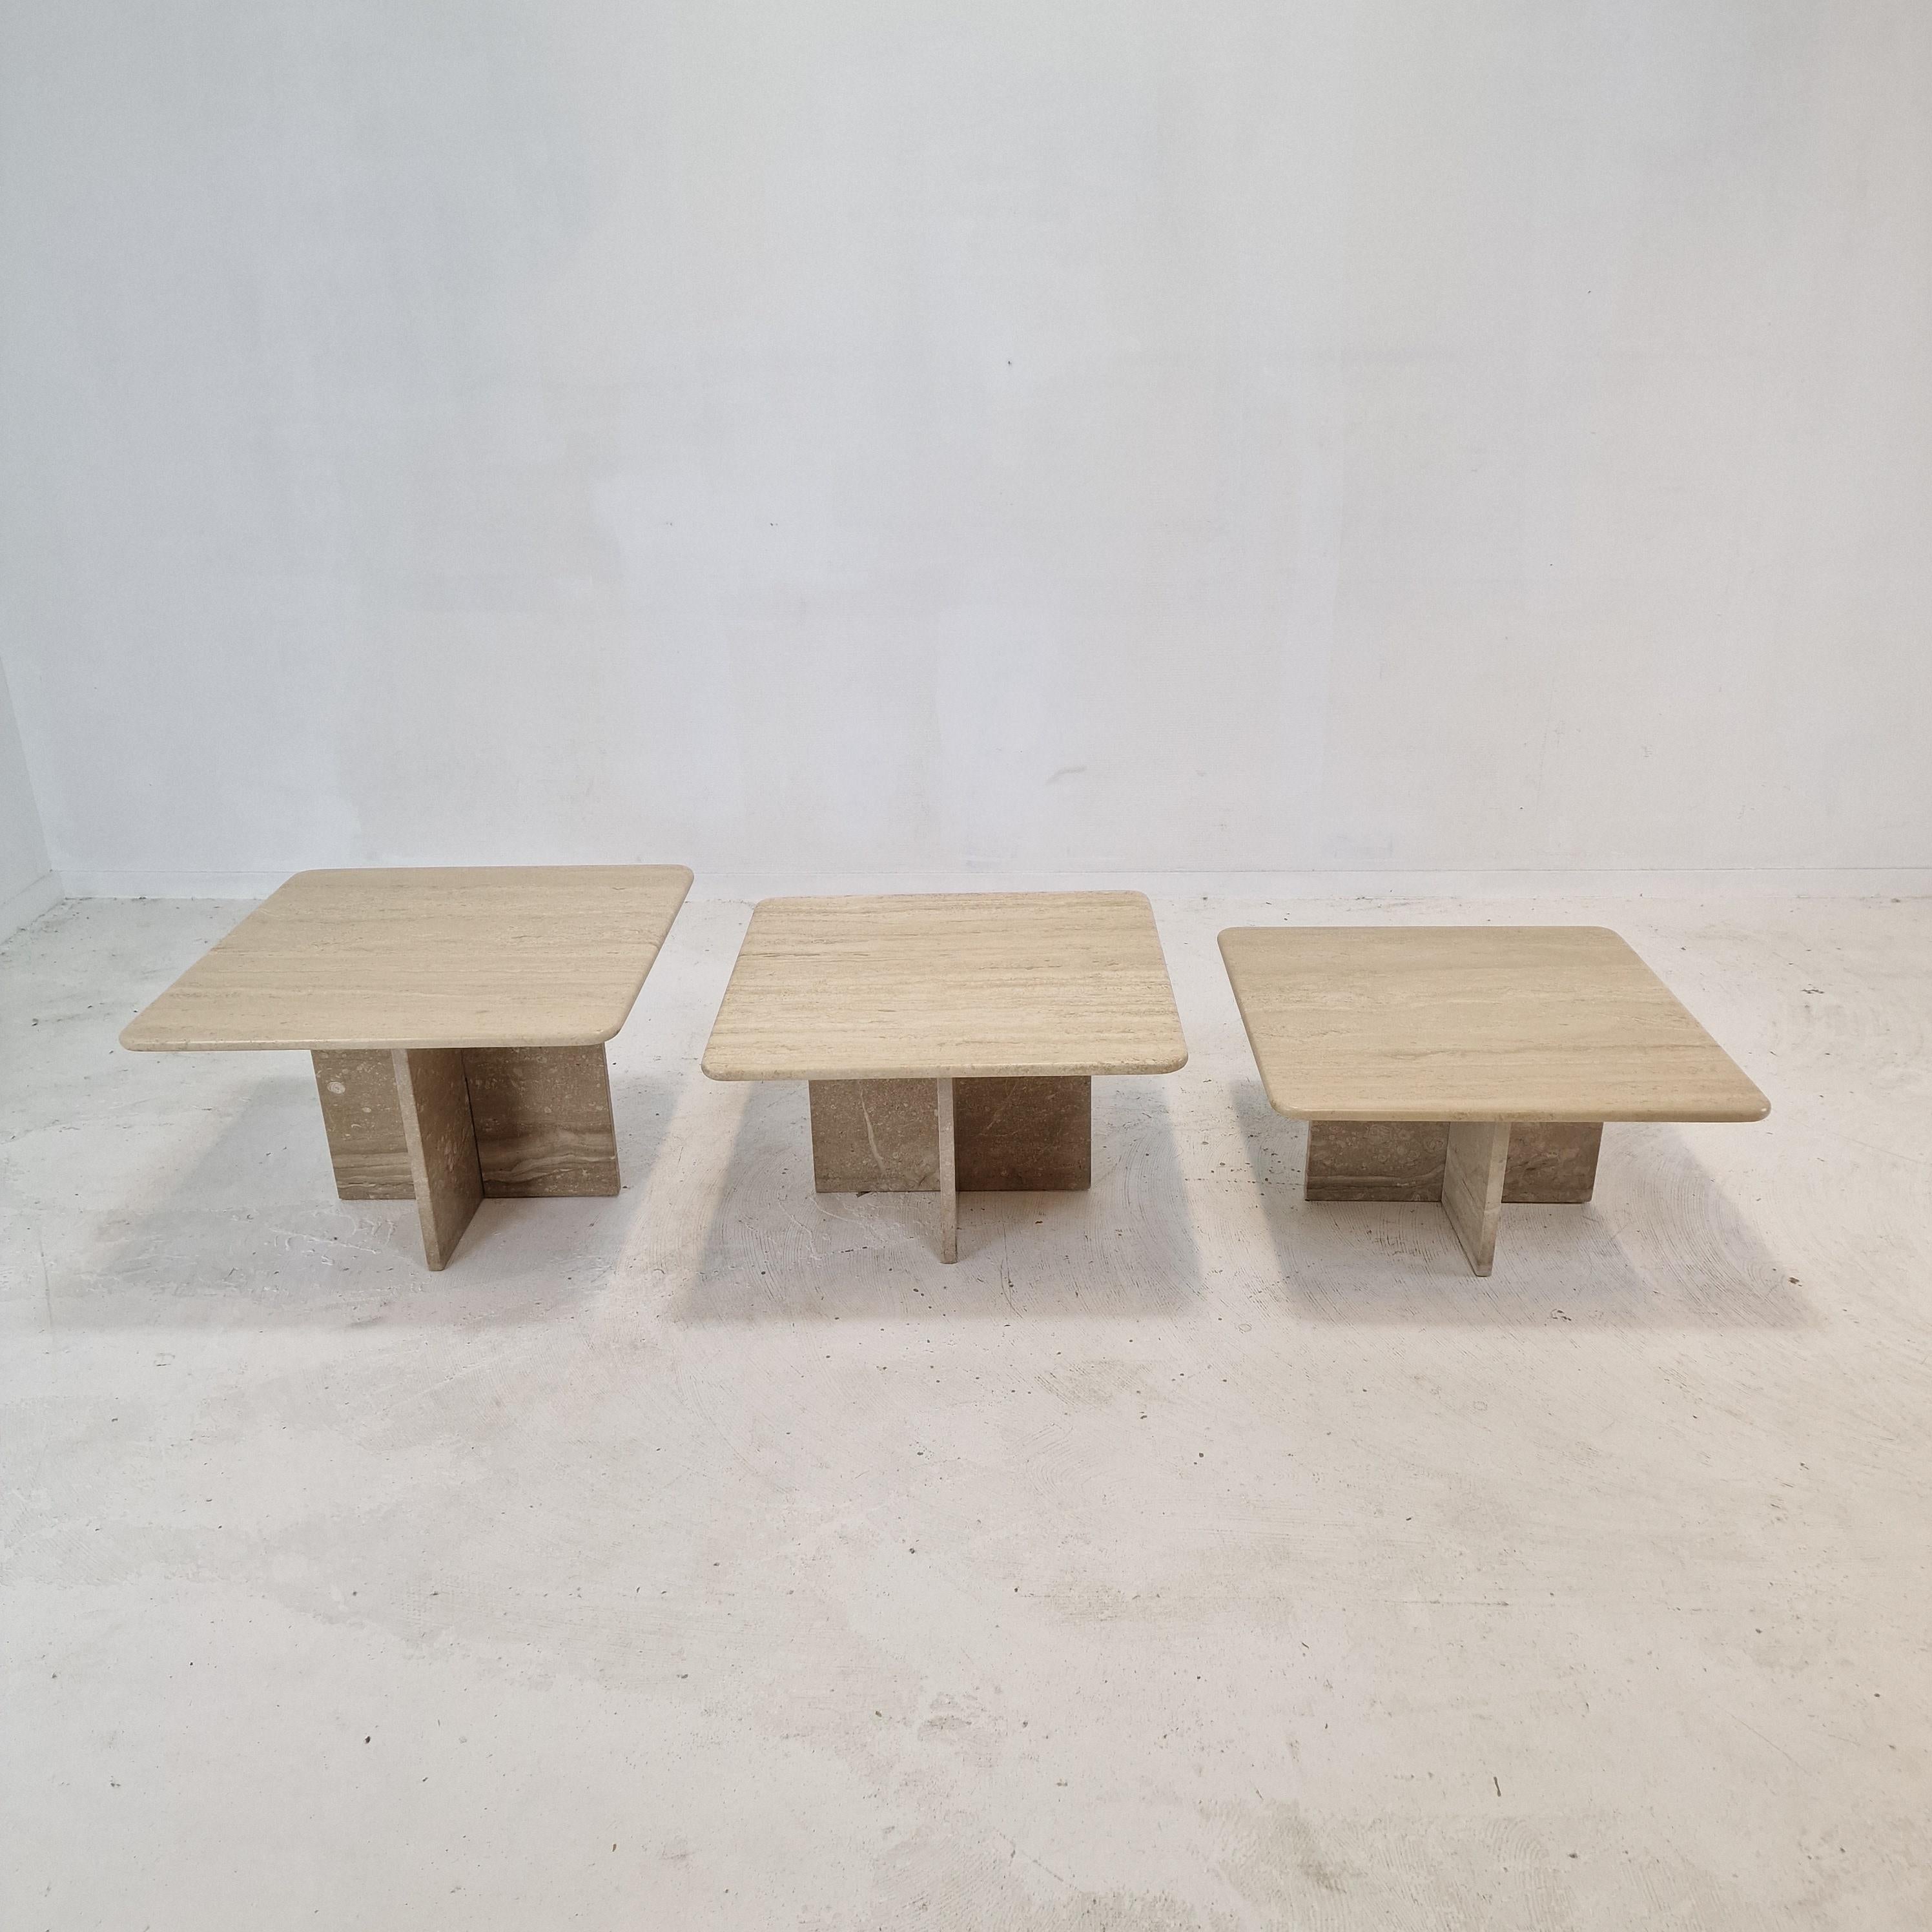 Hand-Crafted Set of 3 Italian Travertine Coffee or Side Tables, 1990s For Sale